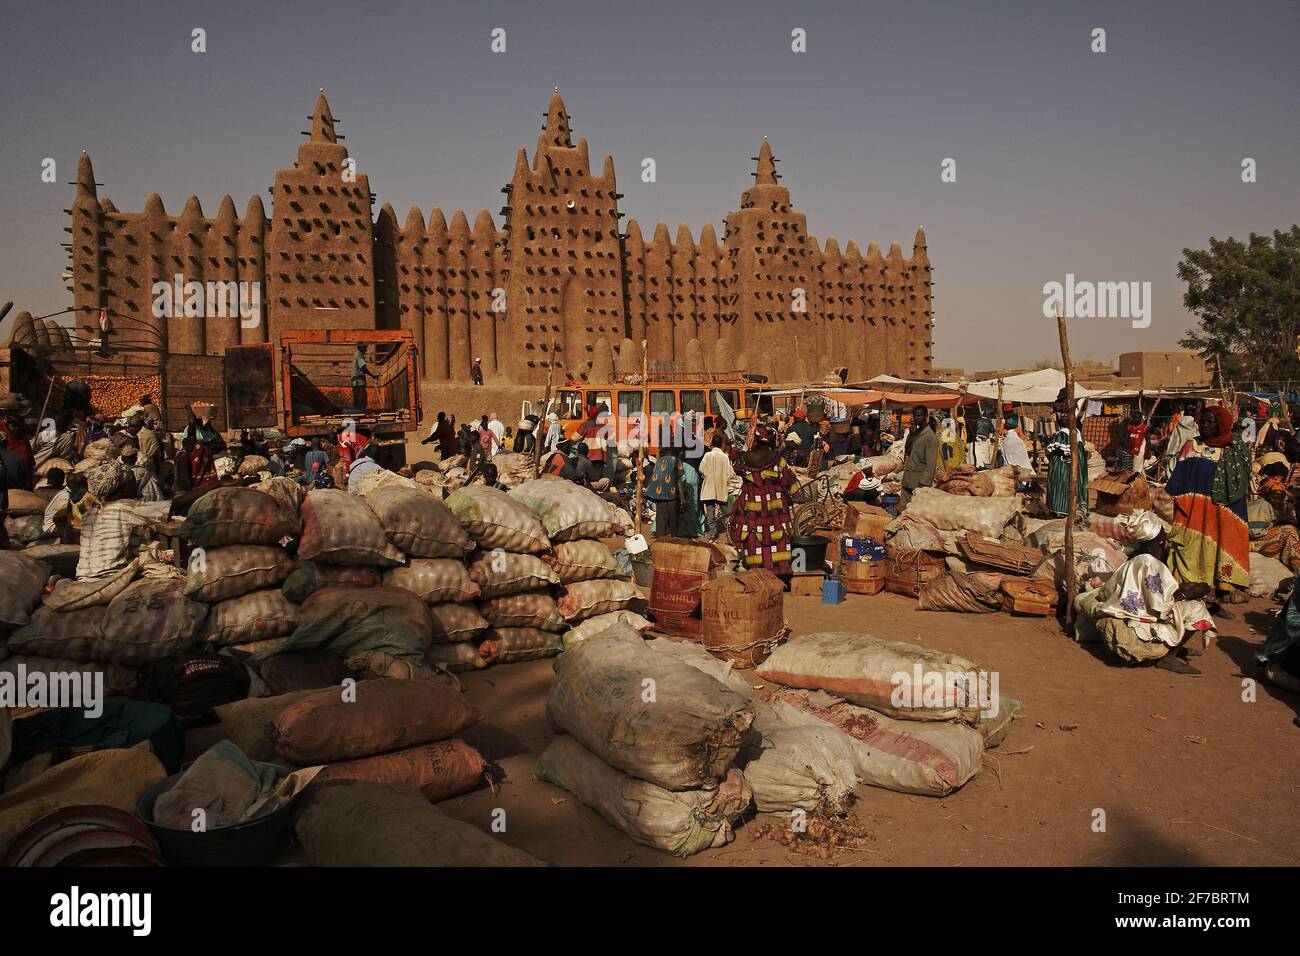 Market of Djenne, Mali, West Africa. Grand Mosque of Djenne in the background . Stock Photo